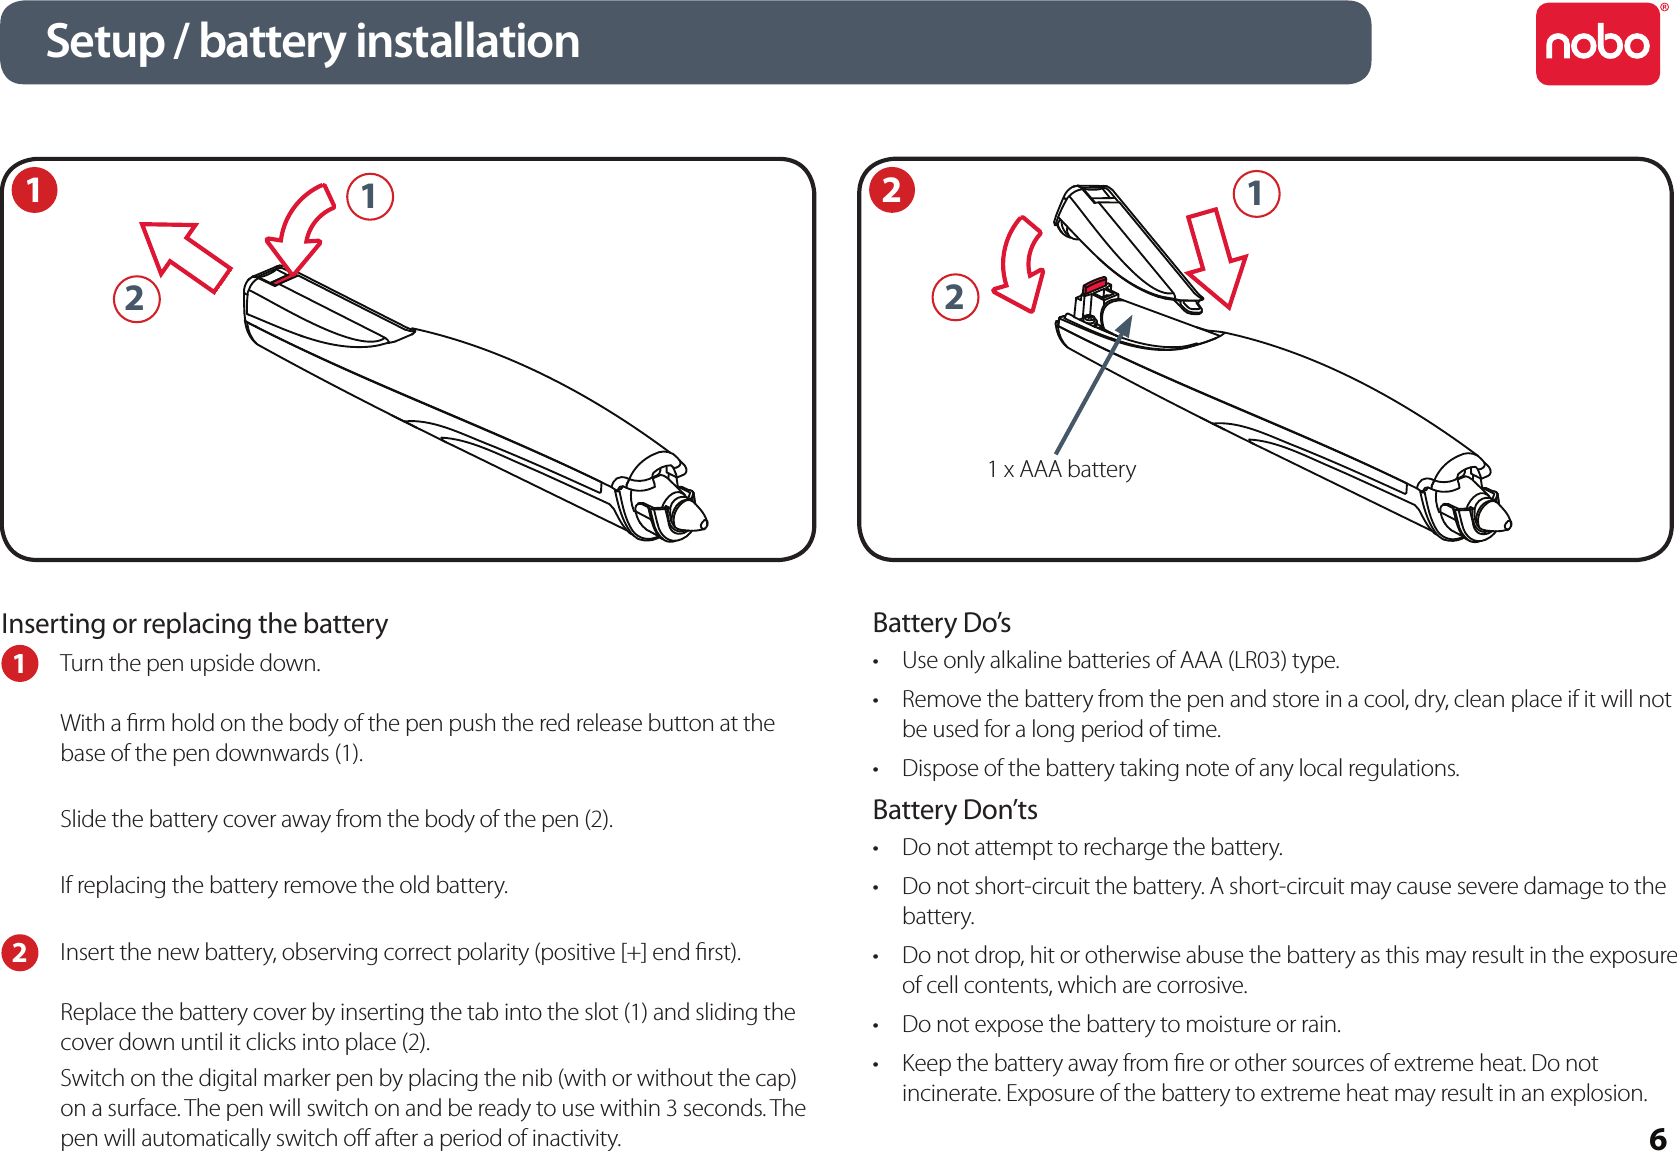 6Inserting or replacing the battery1  Turn the pen upside down.With a rm hold on the body of the pen push the red release button at the base of the pen downwards (1). Slide the battery cover away from the body of the pen (2).If replacing the battery remove the old battery.2  Insert the new battery, observing correct polarity (positive [+] end rst).Replace the battery cover by inserting the tab into the slot (1) and sliding the cover down until it clicks into place (2).Switch on the digital marker pen by placing the nib (with or without the cap) on a surface. The pen will switch on and be ready to use within 3 seconds. The pen will automatically switch o after a period of inactivity.Battery Do’sUse only alkaline batteries of AAA (LR03) type.•Remove the battery from the pen and store in a cool, dry, clean place if it will not •be used for a long period of time.Dispose of the battery taking note of any local regulations.•Battery Don’tsDo not attempt to recharge the battery.•Do not short-circuit the battery. A short-circuit may cause severe damage to the •battery.Do not drop, hit or otherwise abuse the battery as this may result in the exposure •of cell contents, which are corrosive.Do not expose the battery to moisture or rain.•Keep the battery away from re or other sources of extreme heat. Do not •incinerate. Exposure of the battery to extreme heat may result in an explosion.1Setup / battery installation21 x AAA battery2112